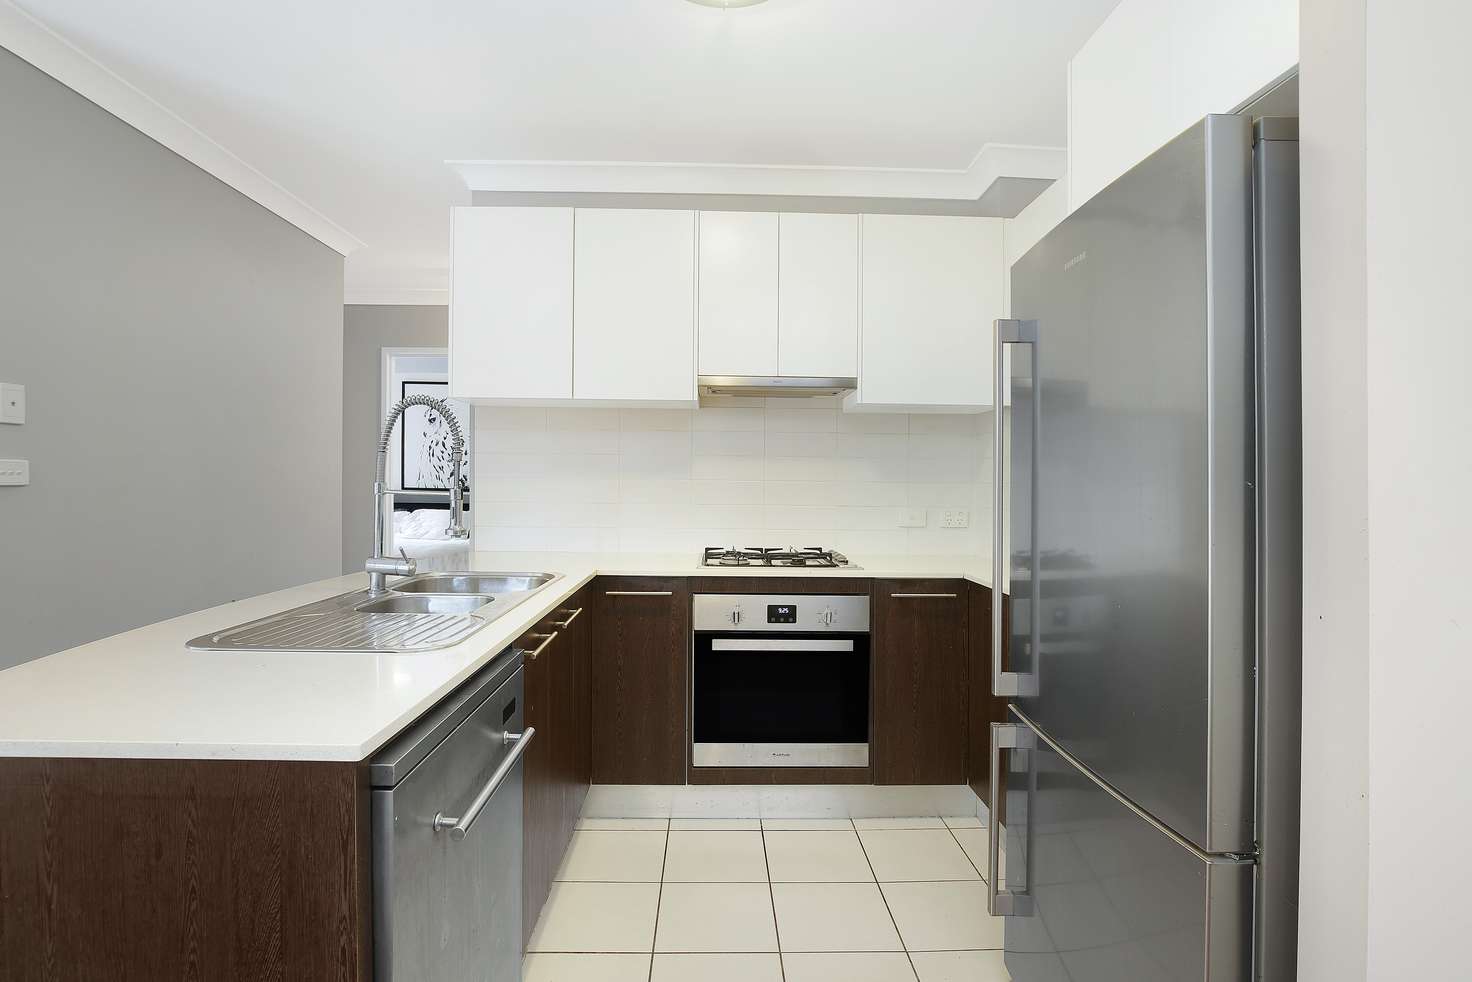 Main view of Homely apartment listing, 3/22 Victoria Street, Wollongong NSW 2500